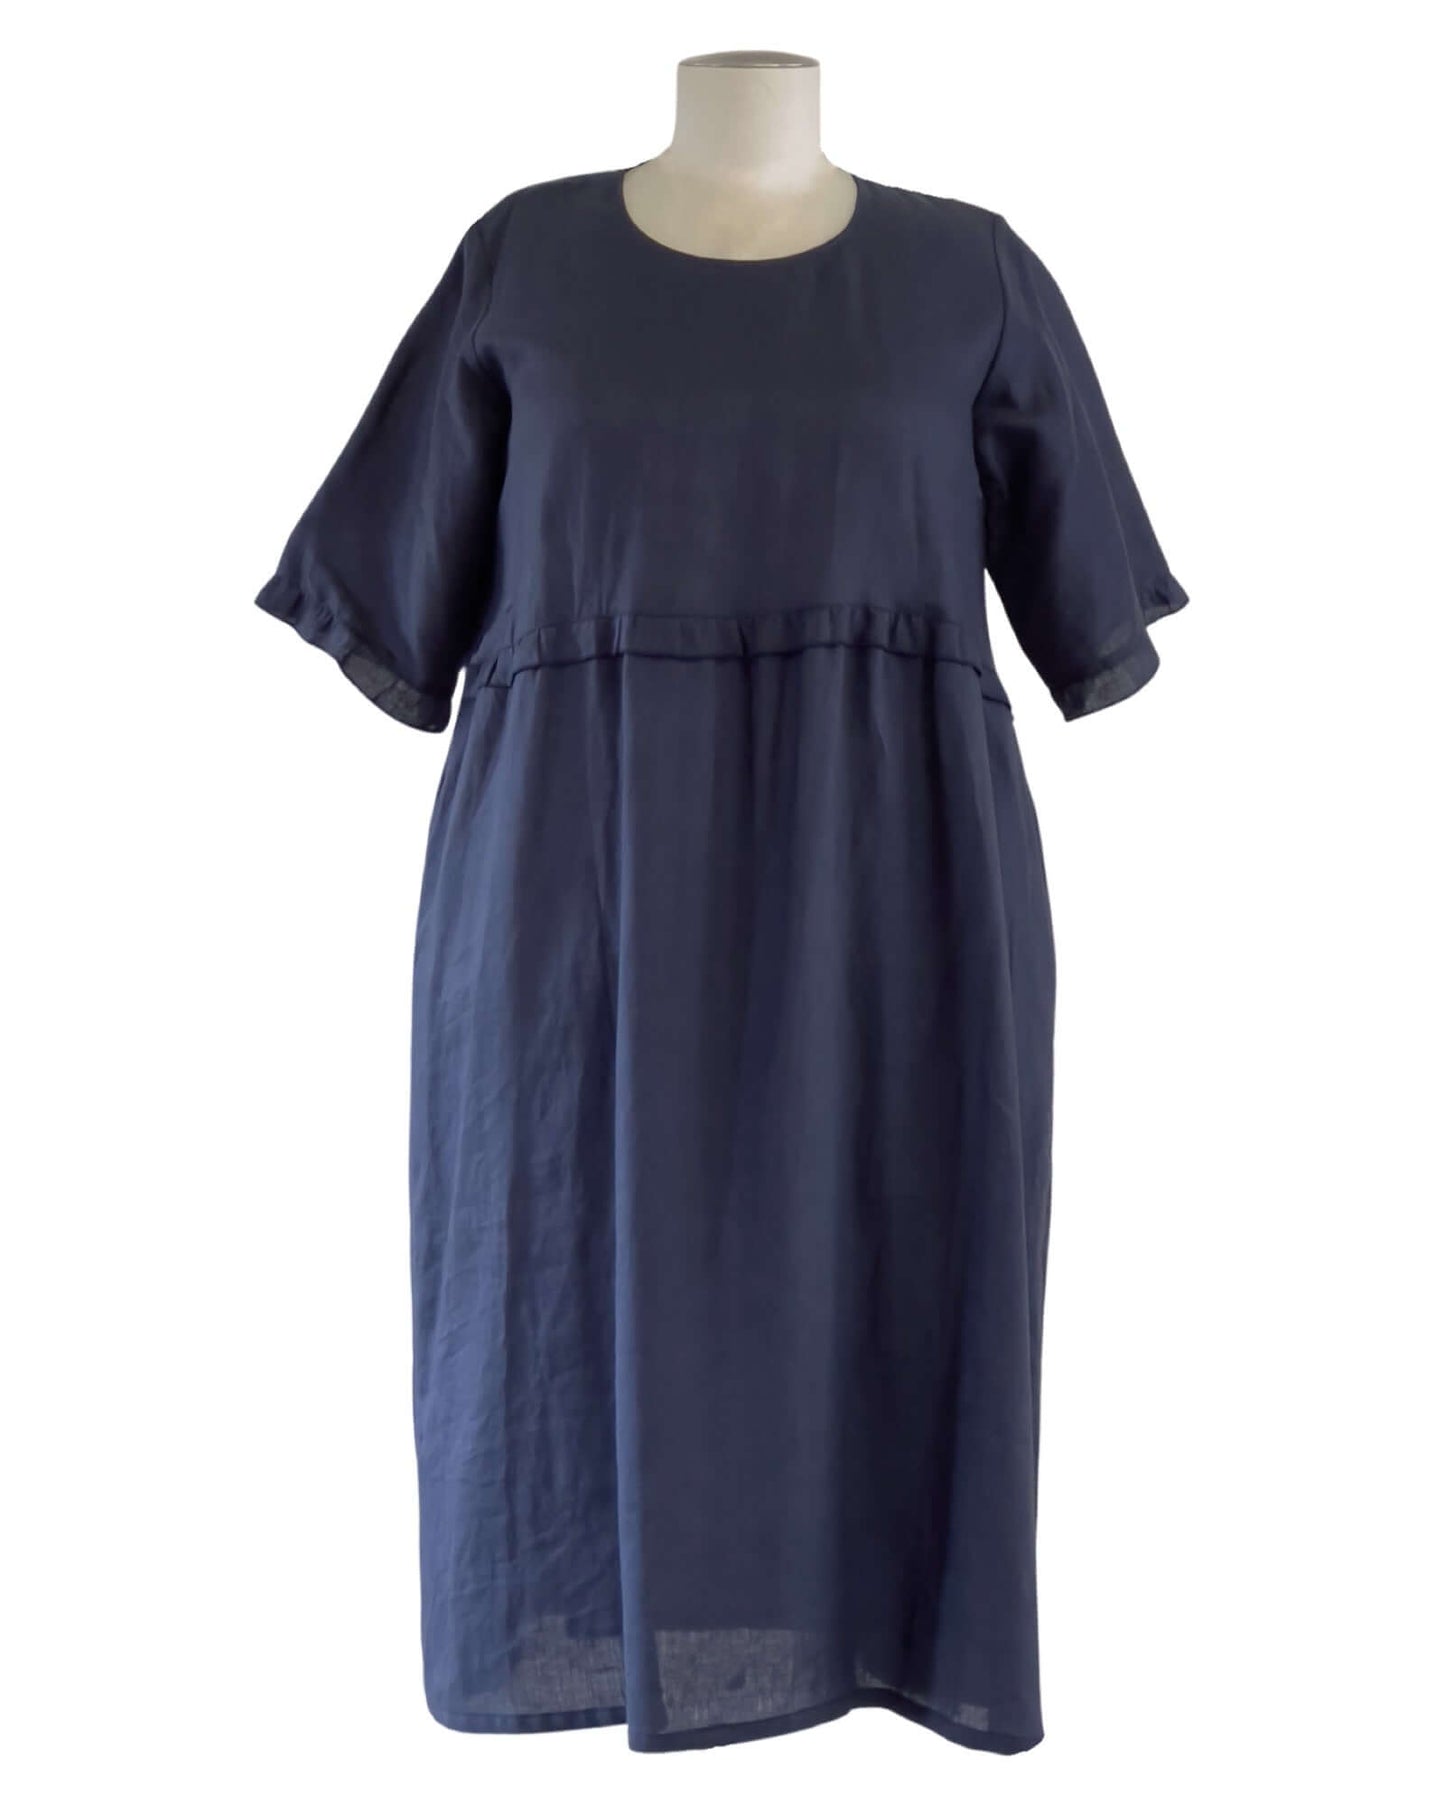 FRILLING & ABLE DRESS - Navy